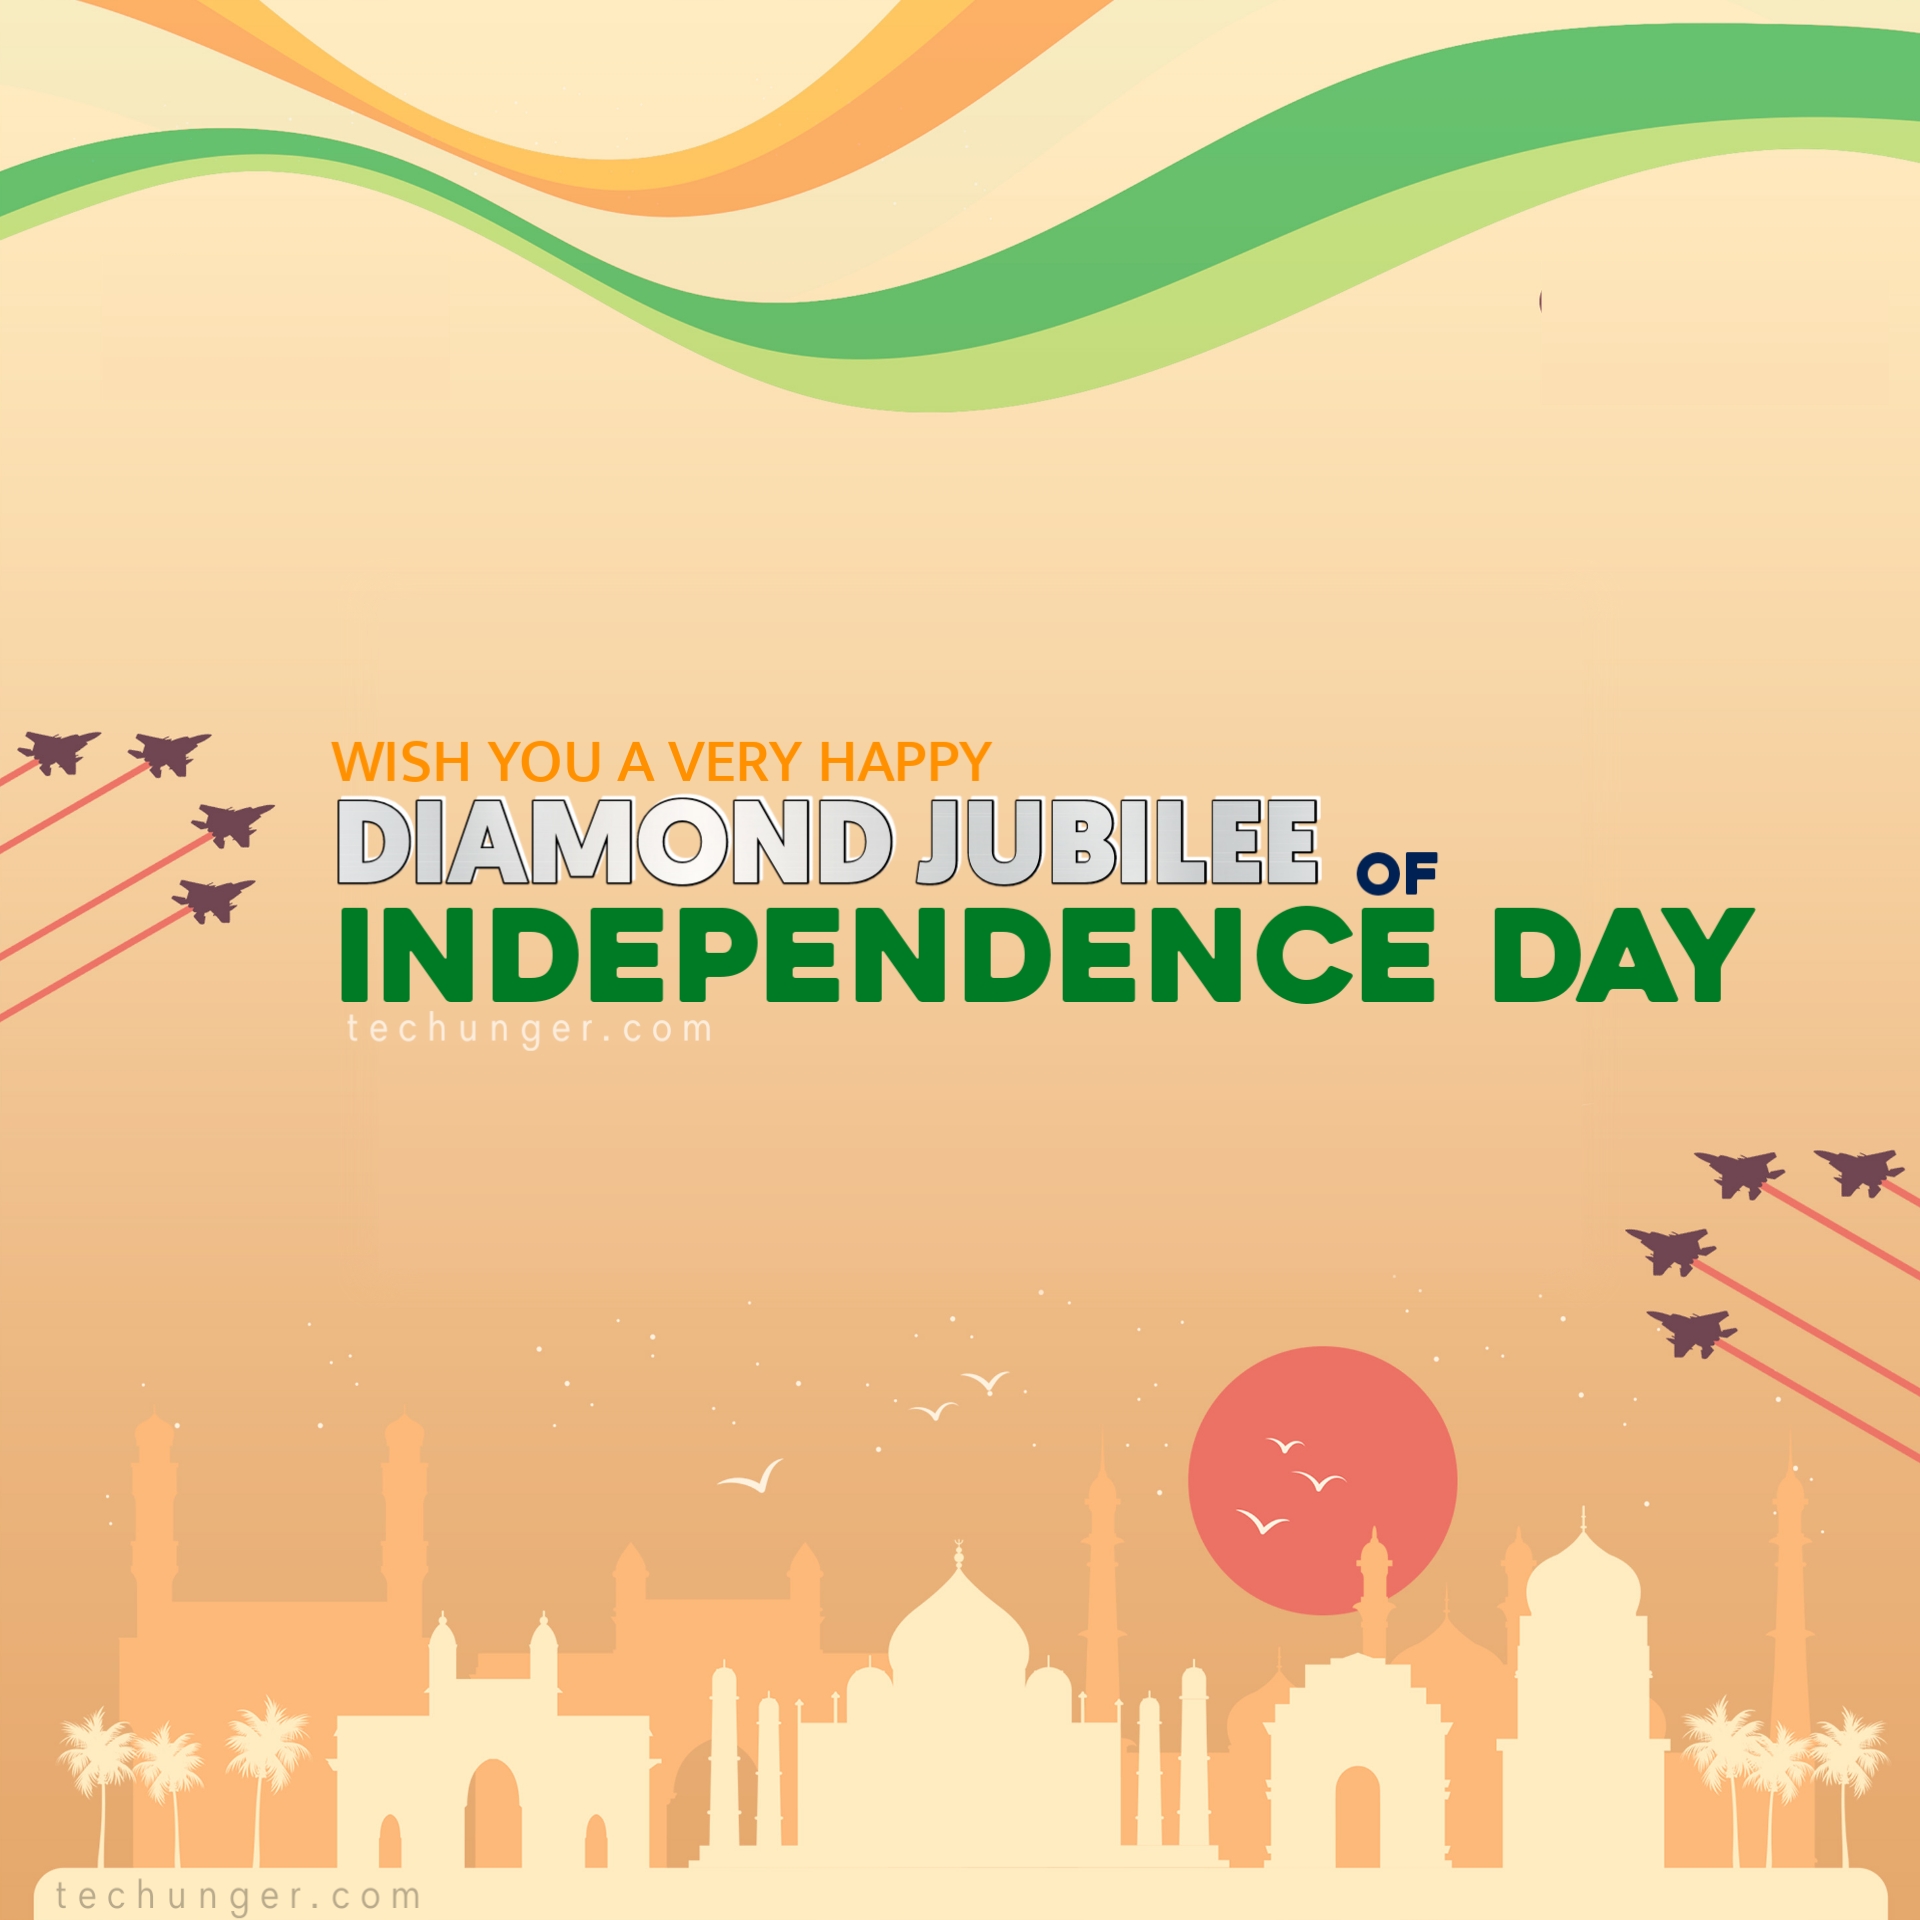 independence day drawing, independence day poster, independence day speech, independence day drawing ideas, independence day quotes, independence day background, independence day essay in english, independence day poem, independence day images, independence day activity, independence day art, independence day ads, independence day article, independence day baby photoshoot, independence day background for editing, independence day banner, independence day background hd, independence day border design, independence day bird drawing, independence day best drawing, independence day card, independence day celebration, techunger, saurabh chaudhari, independence day banner with my name, independence day banner with name *